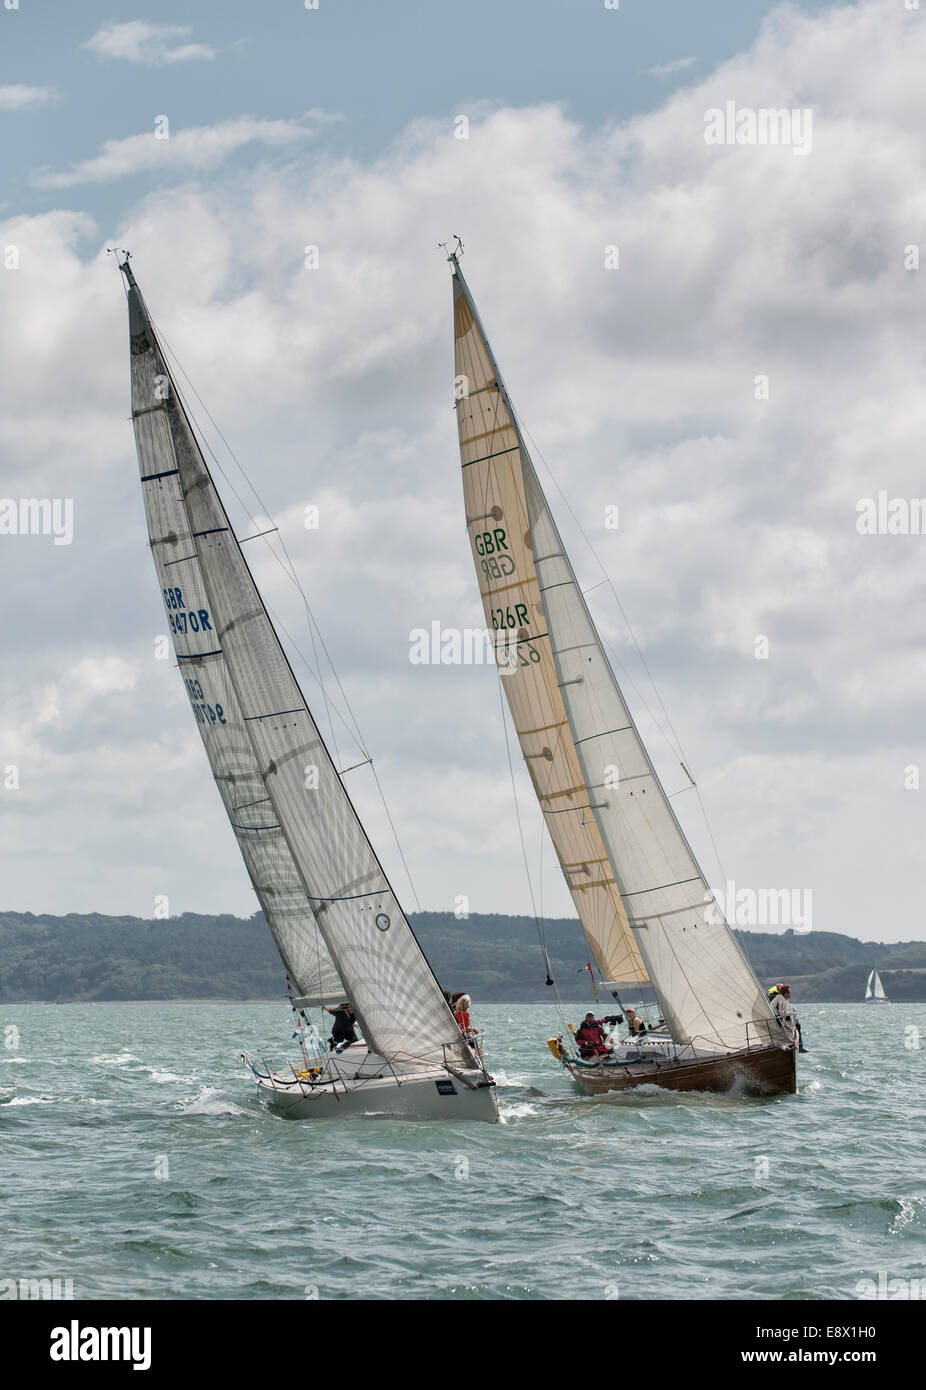 Close racing between yacht Old Mother Gun sail number GBR626R and Banshee sail number GBR9470R during the Cowes Week Regatta Stock Photo